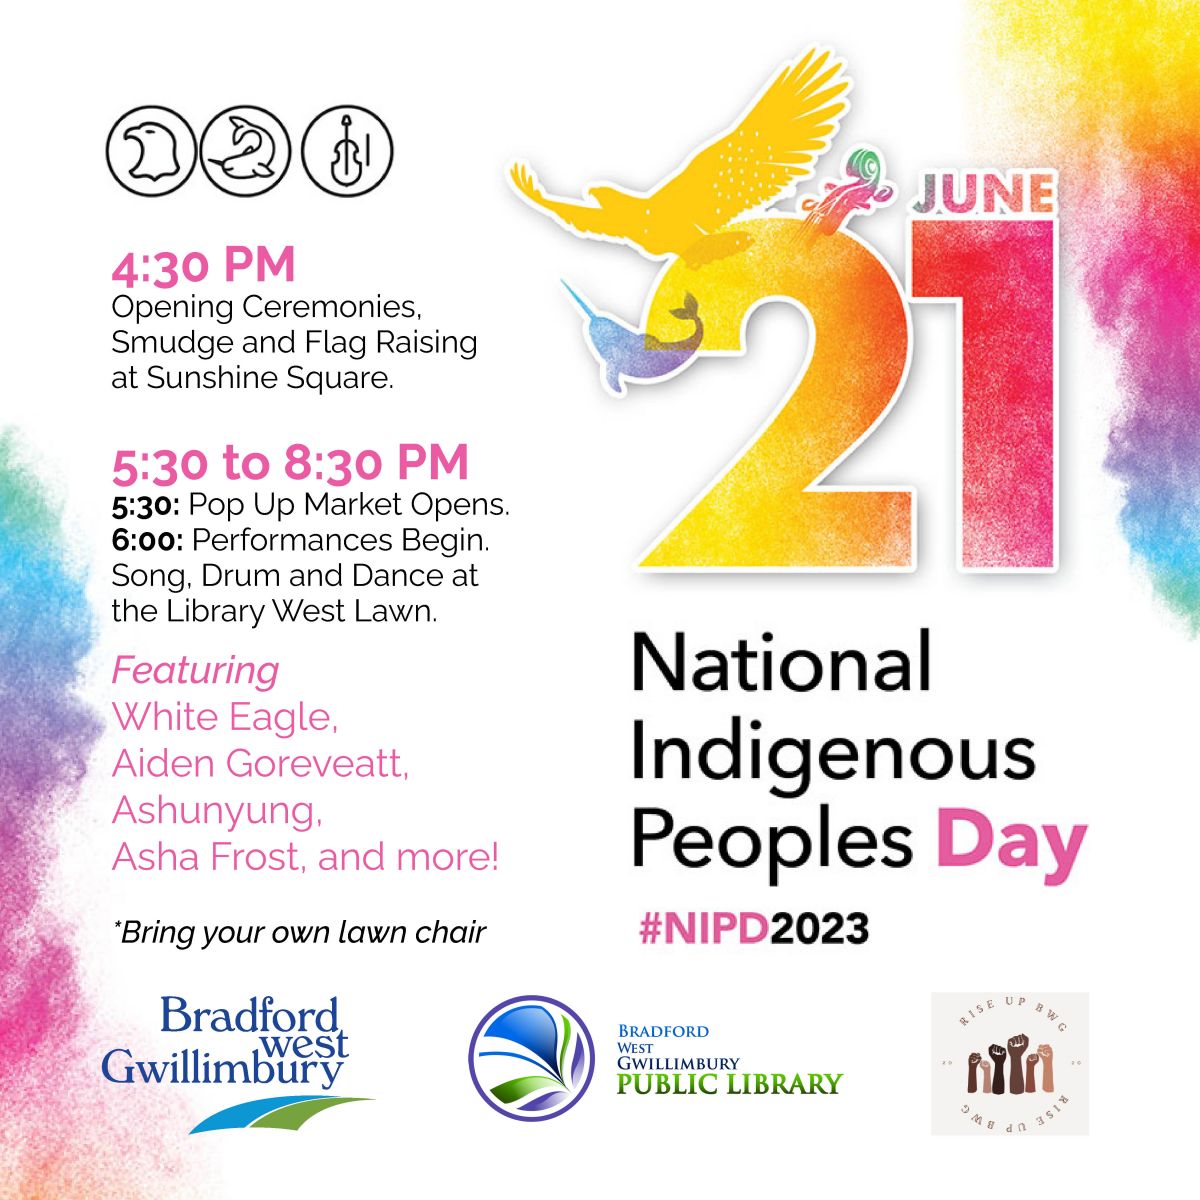 National Indigenous Peoples Day Event on June 21